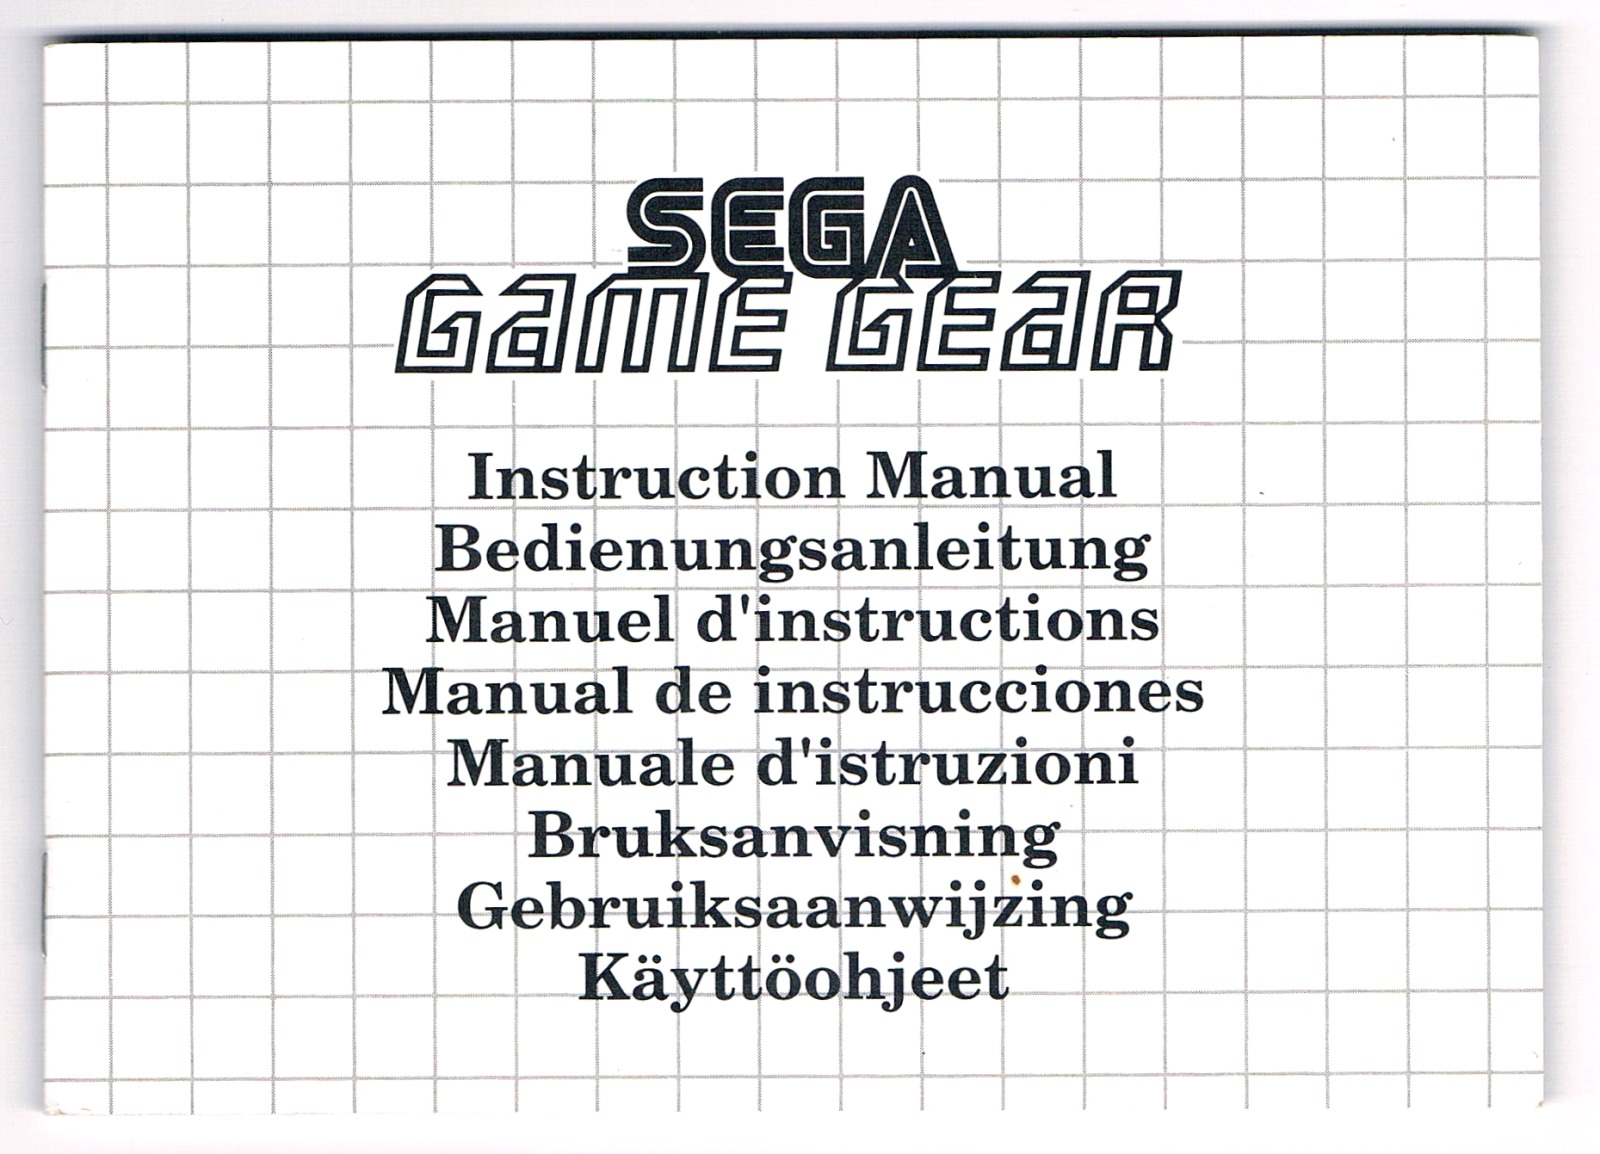 Instructions - Instructions Manual